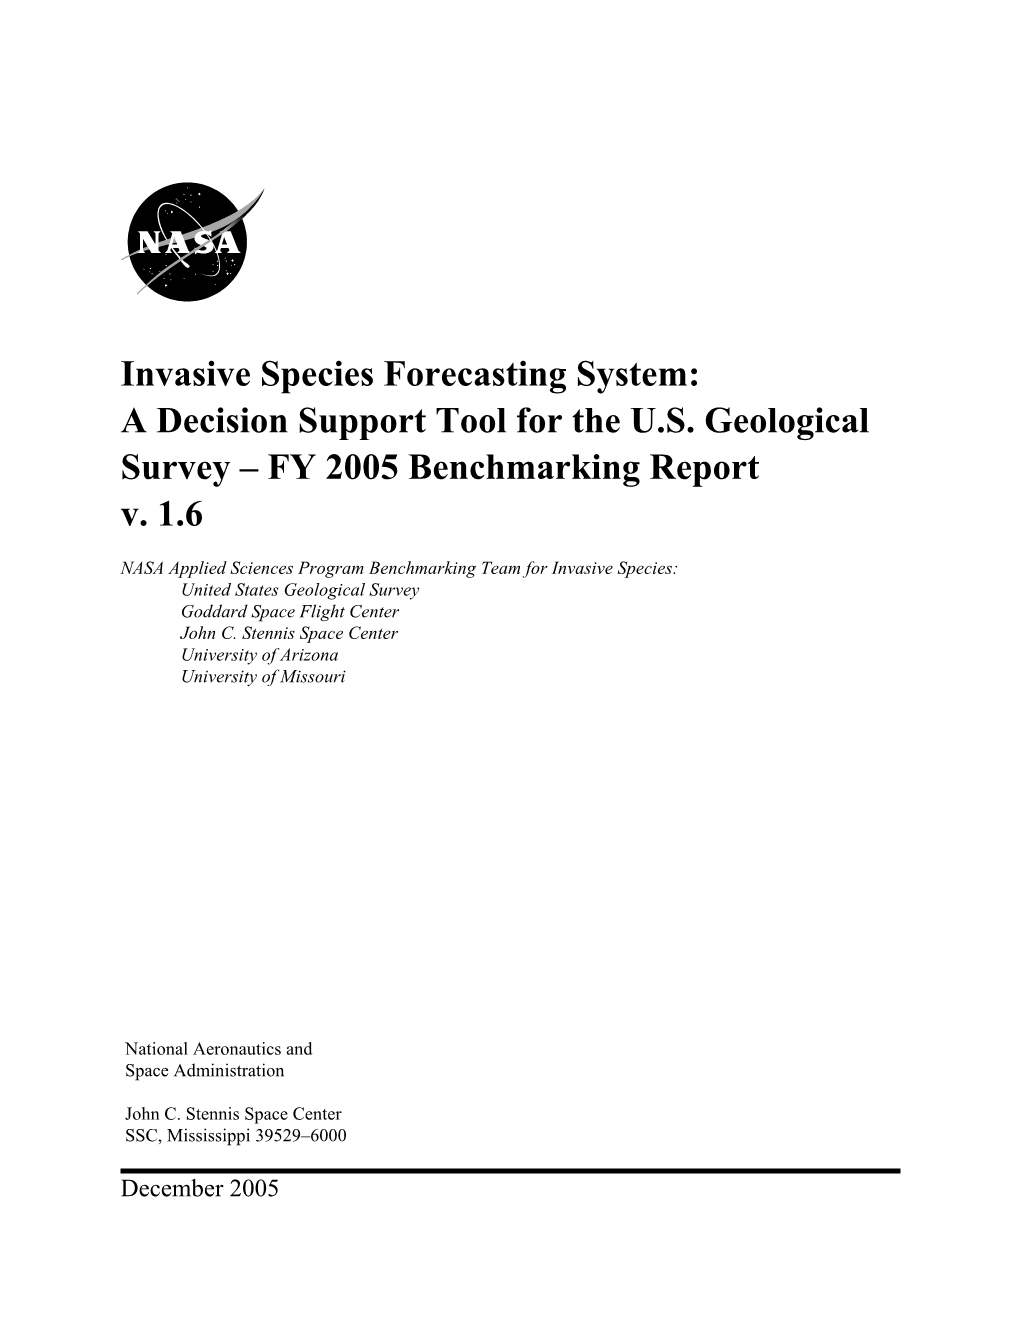 Invasive Species Forecasting System: a Decision Support Tool for the U.S. Geological Survey – FY 2005 Benchmarking Report V